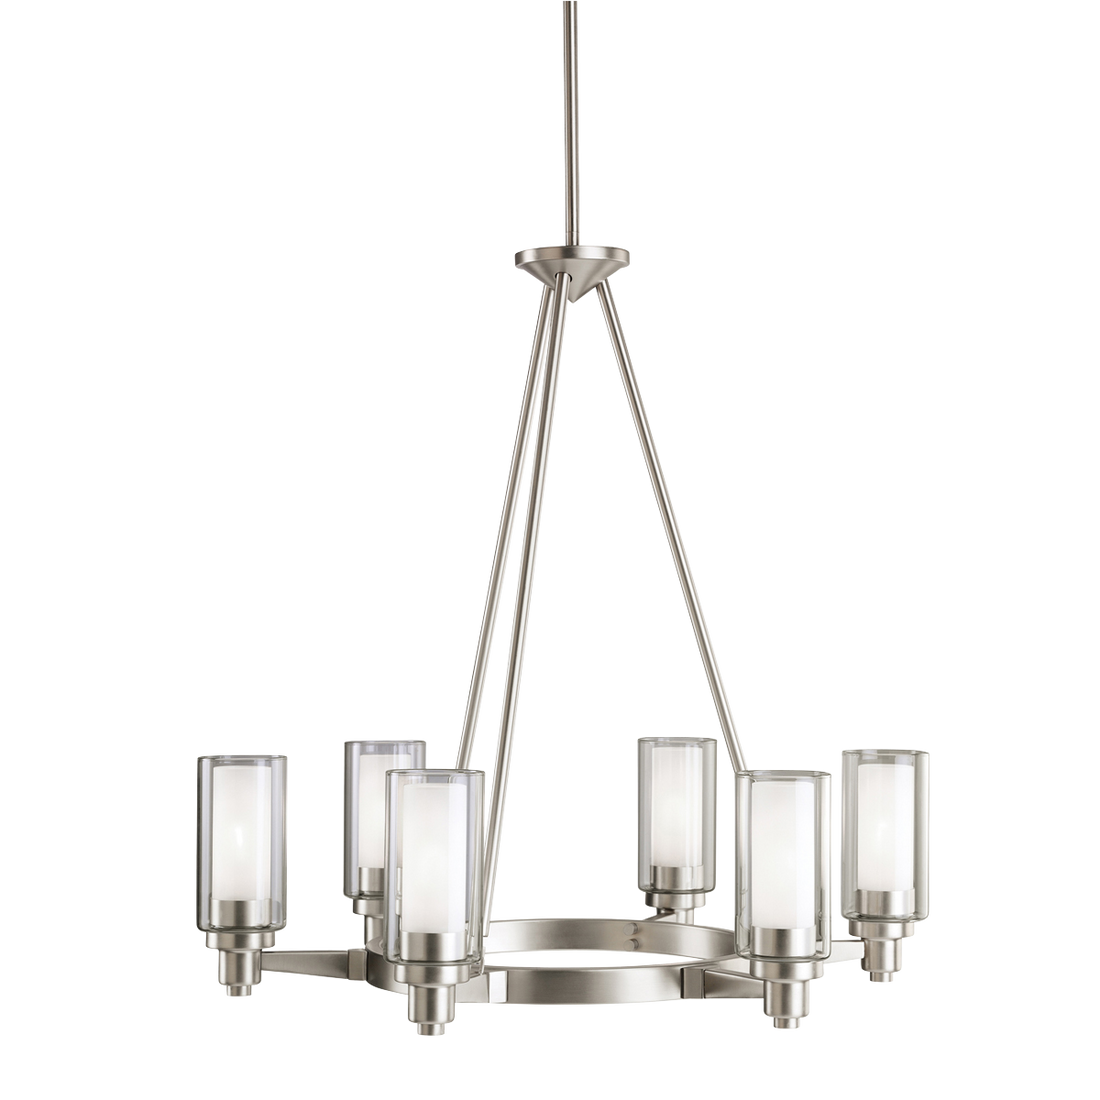 Circolo 5-Light Chandelier in Brushed Nickel, by Kichler, 2344NI